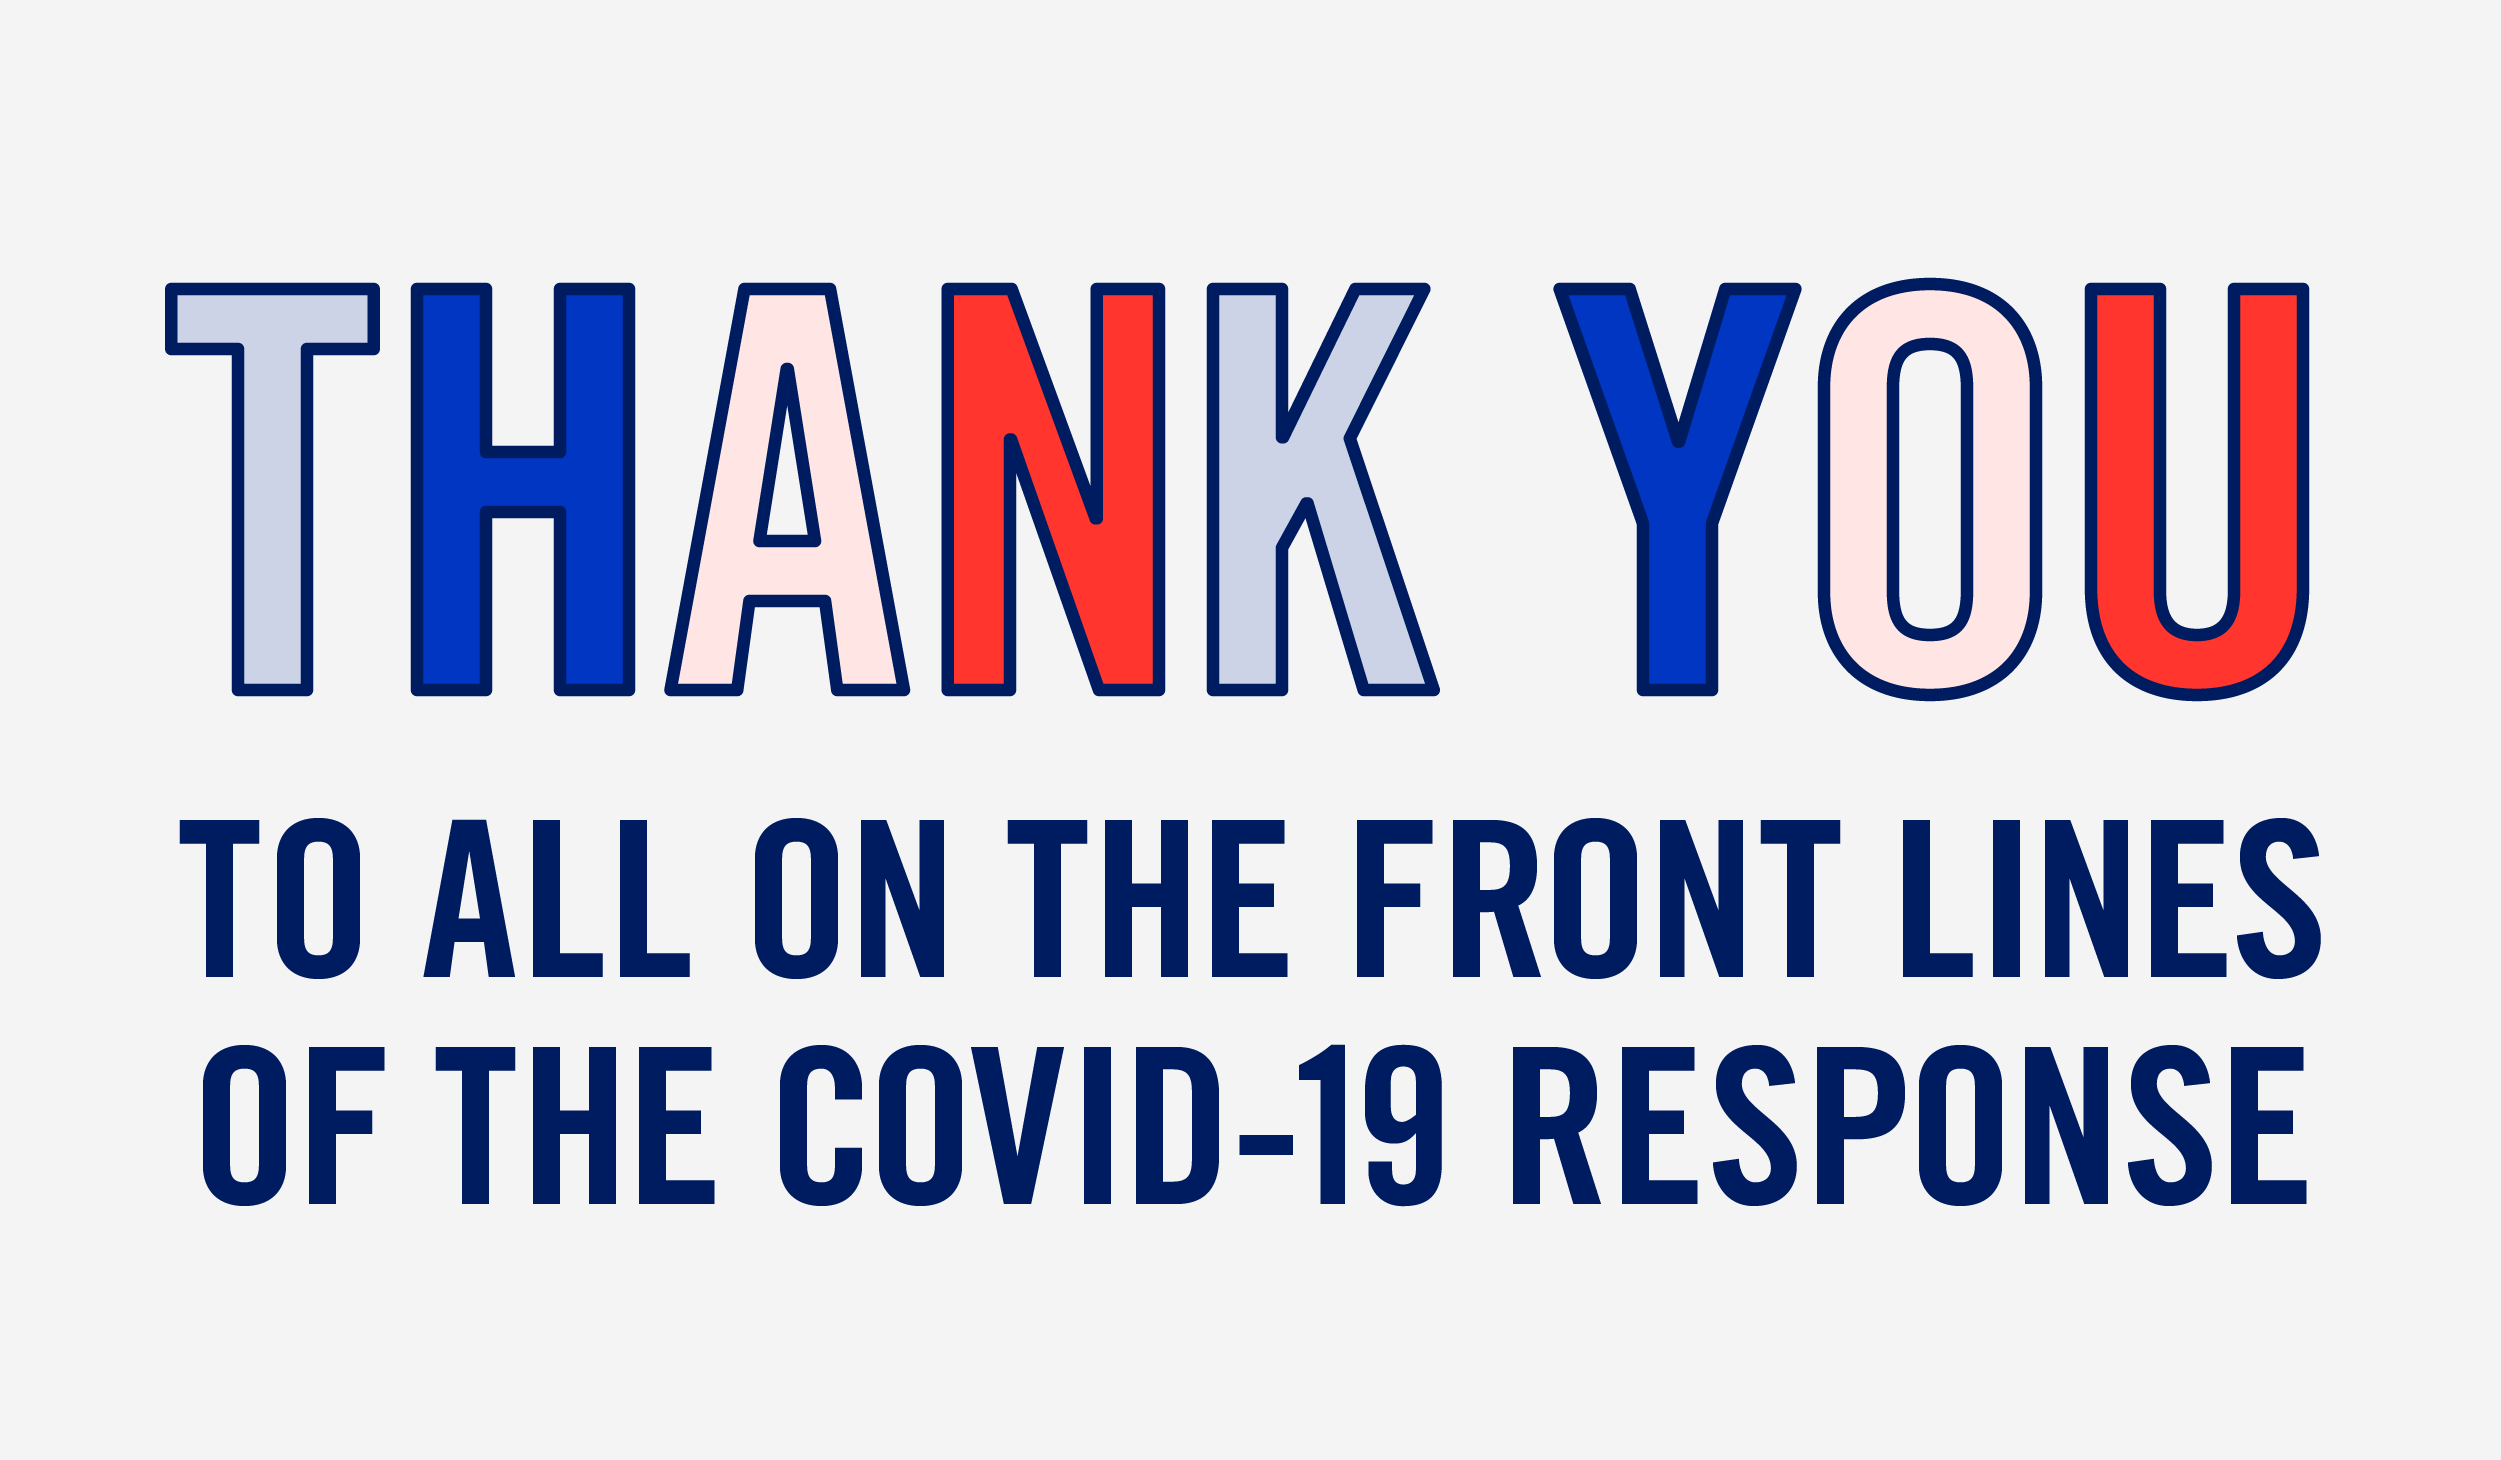 Thank you to all on the front lines of the COVID-19 response.